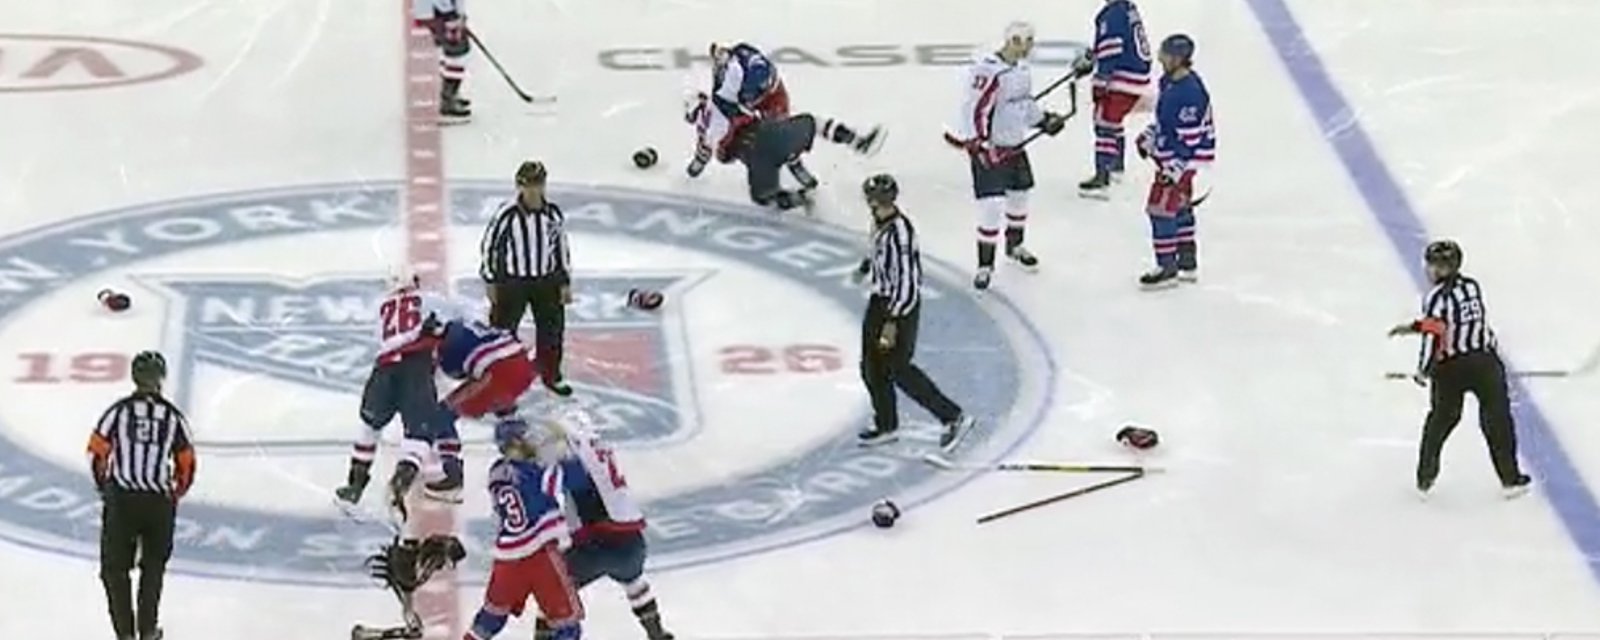 Line brawl, Tom Wilson injury, Buchnevich game ejection, Oshie hat trick and all the craziness from last night's game between Rangers and Capitals